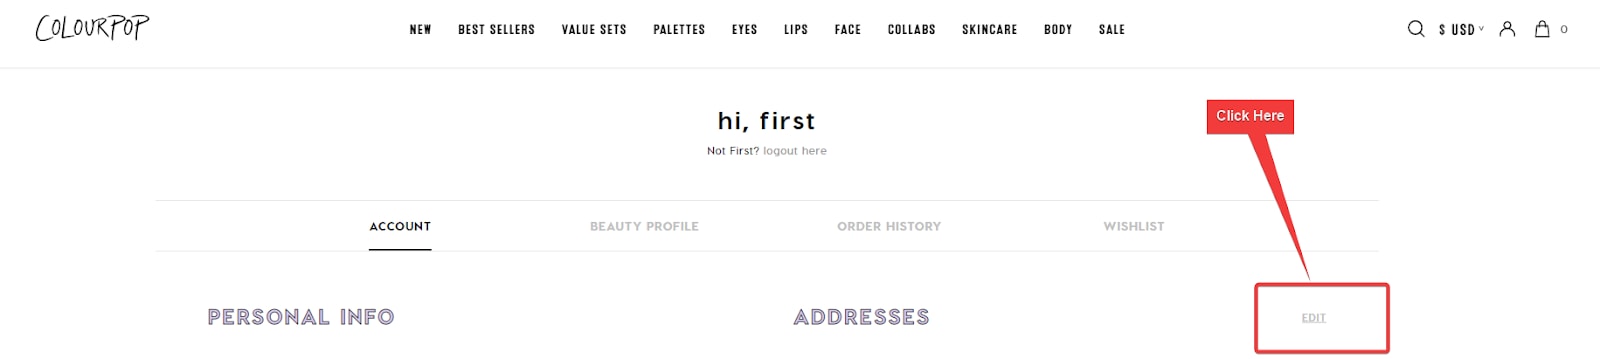 How To Find Colourpop Account Information